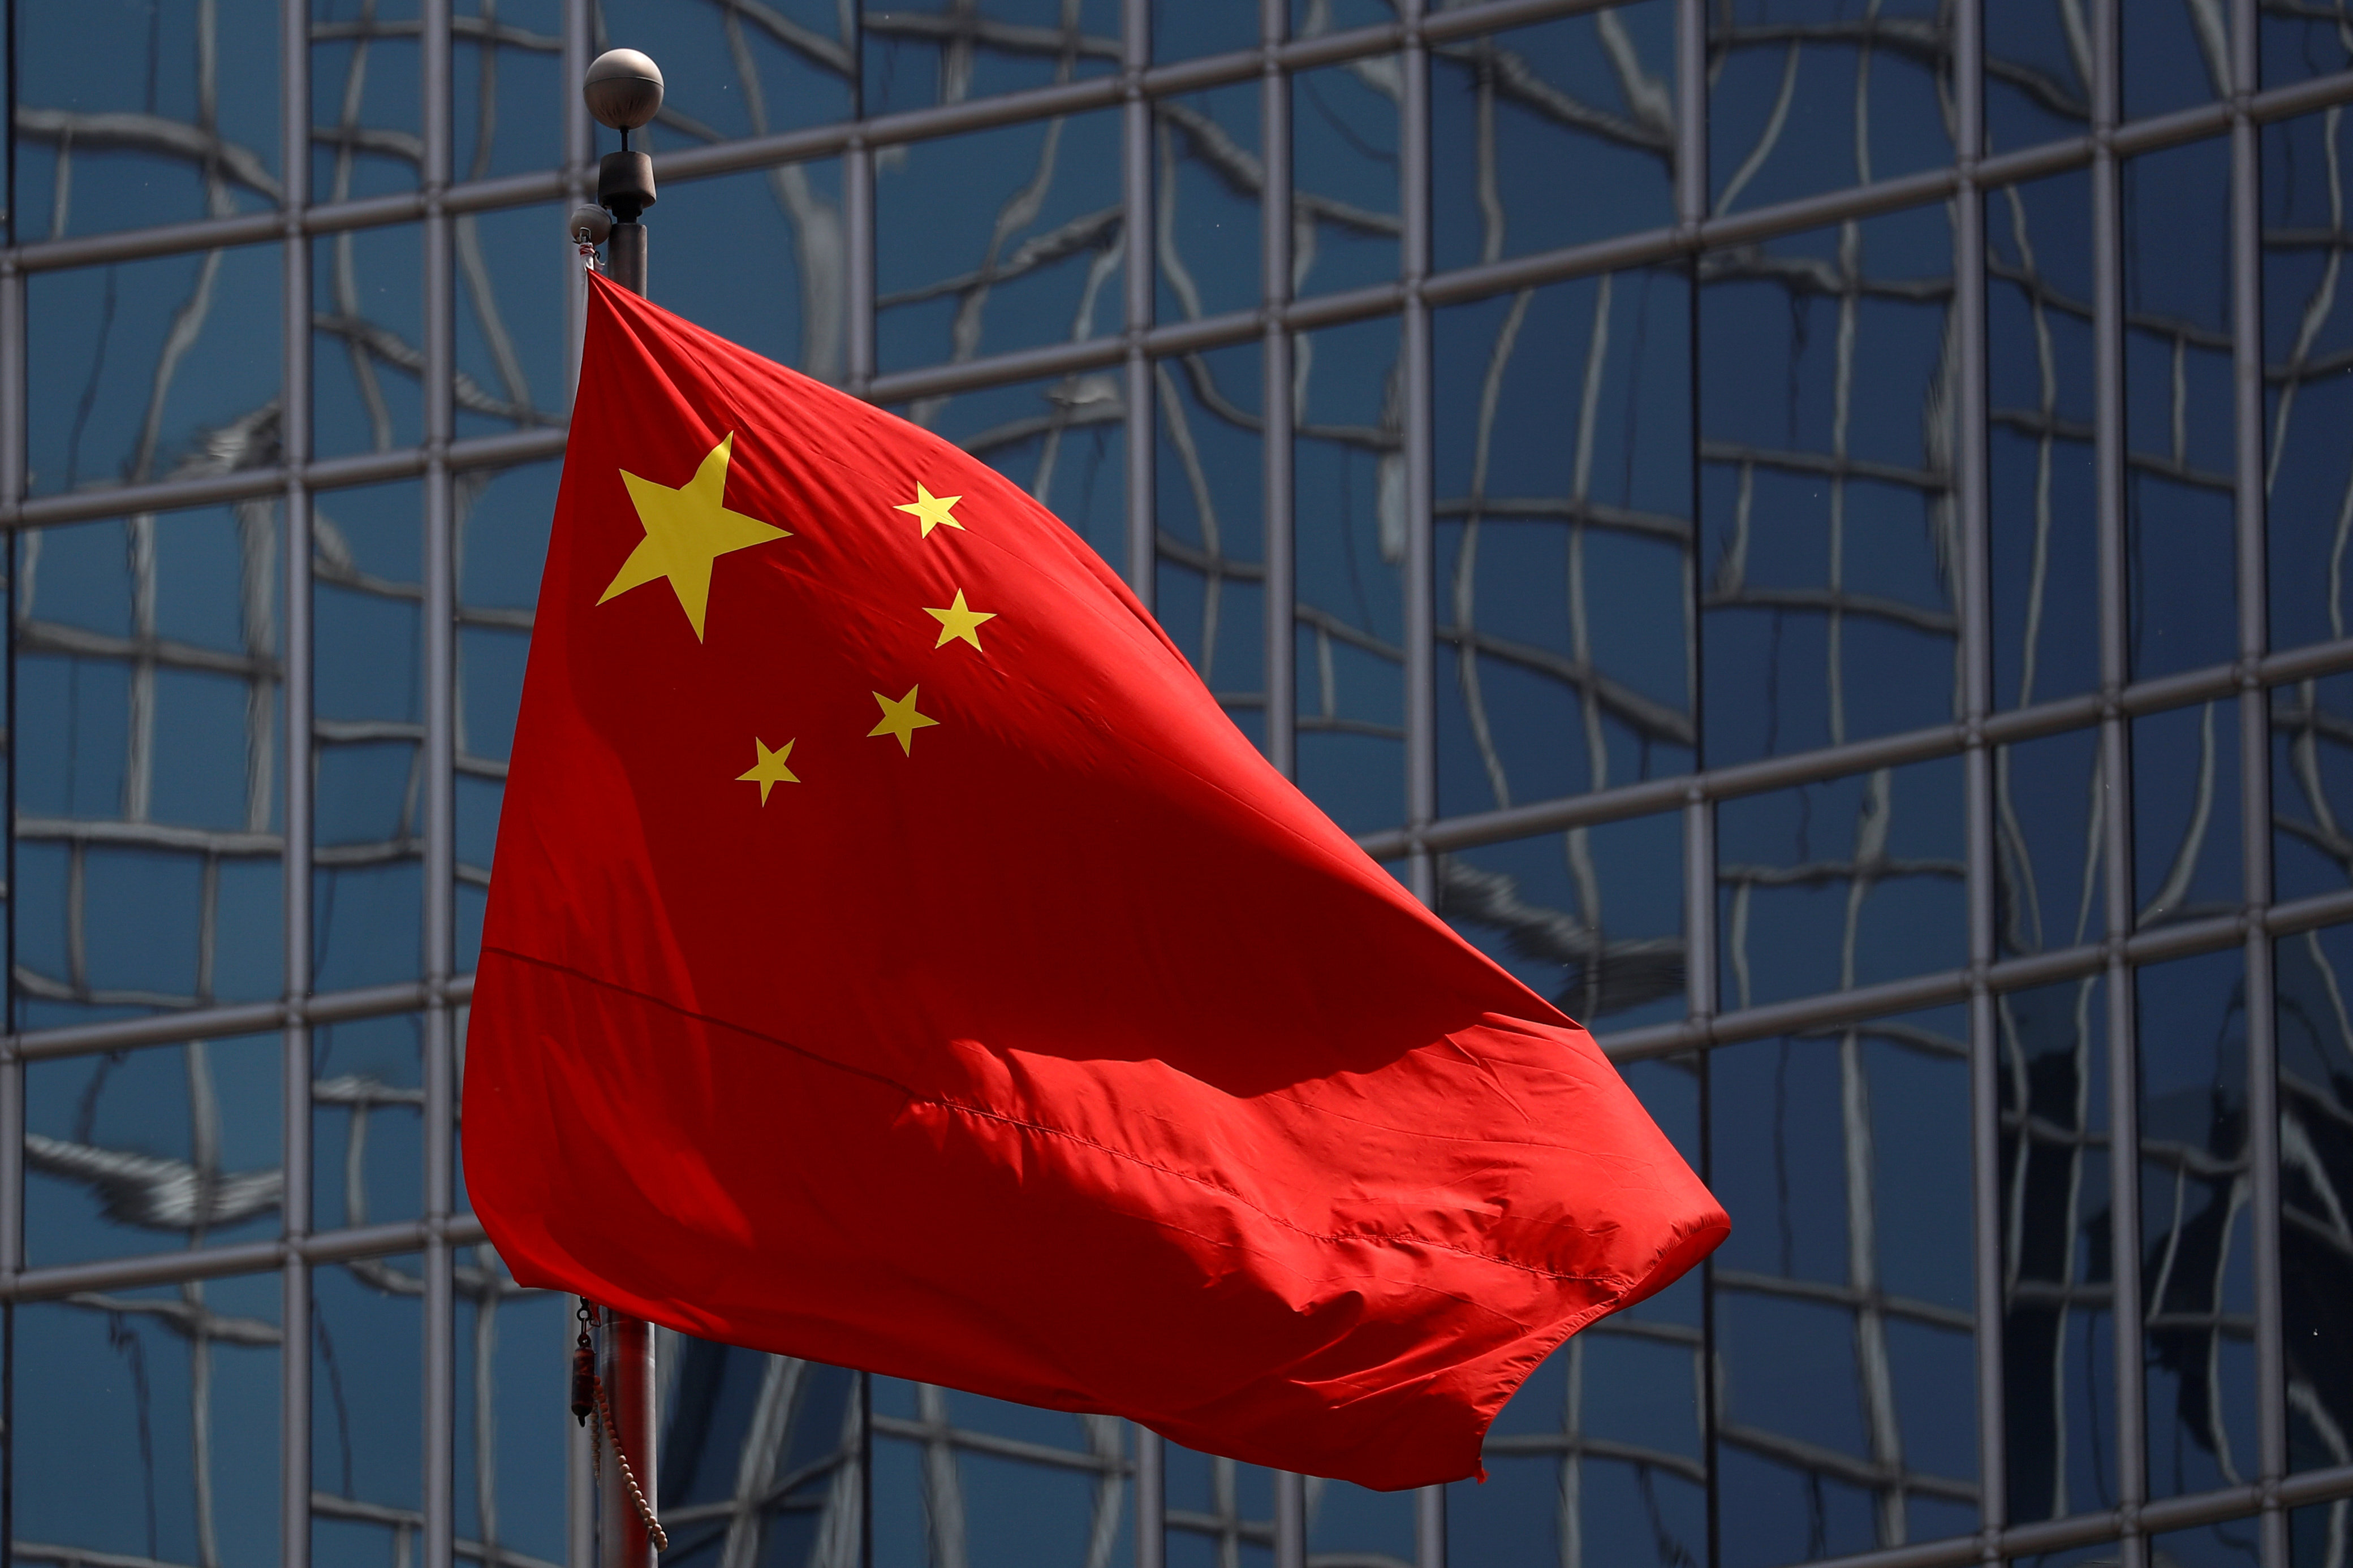 The Chinese national flag is seen in Beijing, China, on April 29, 2020. Photo: Reuters